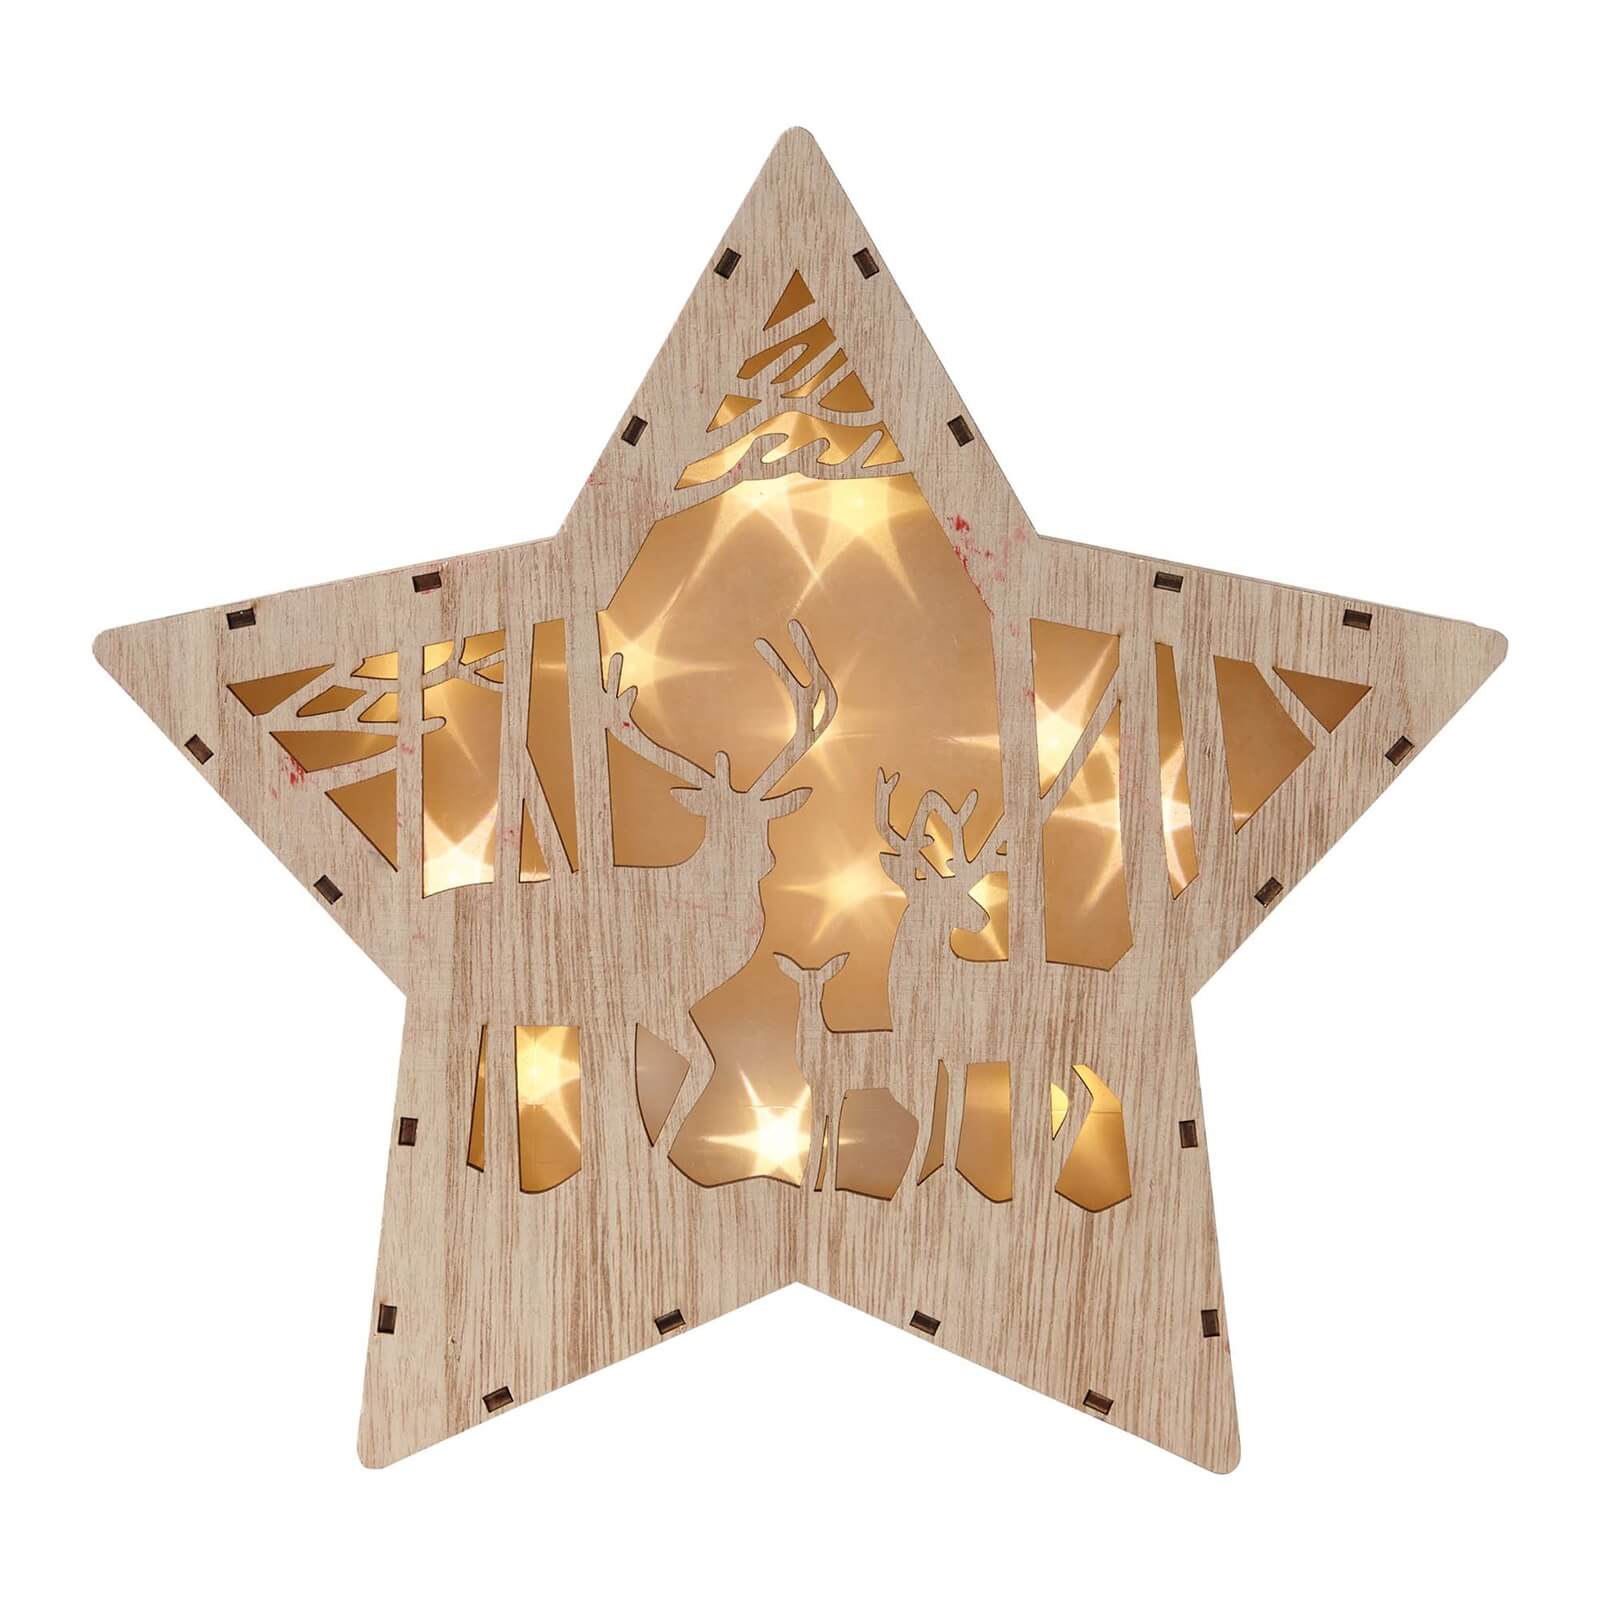 Wooden Deer Scene Light Up Star Decoration (Battery Operated)